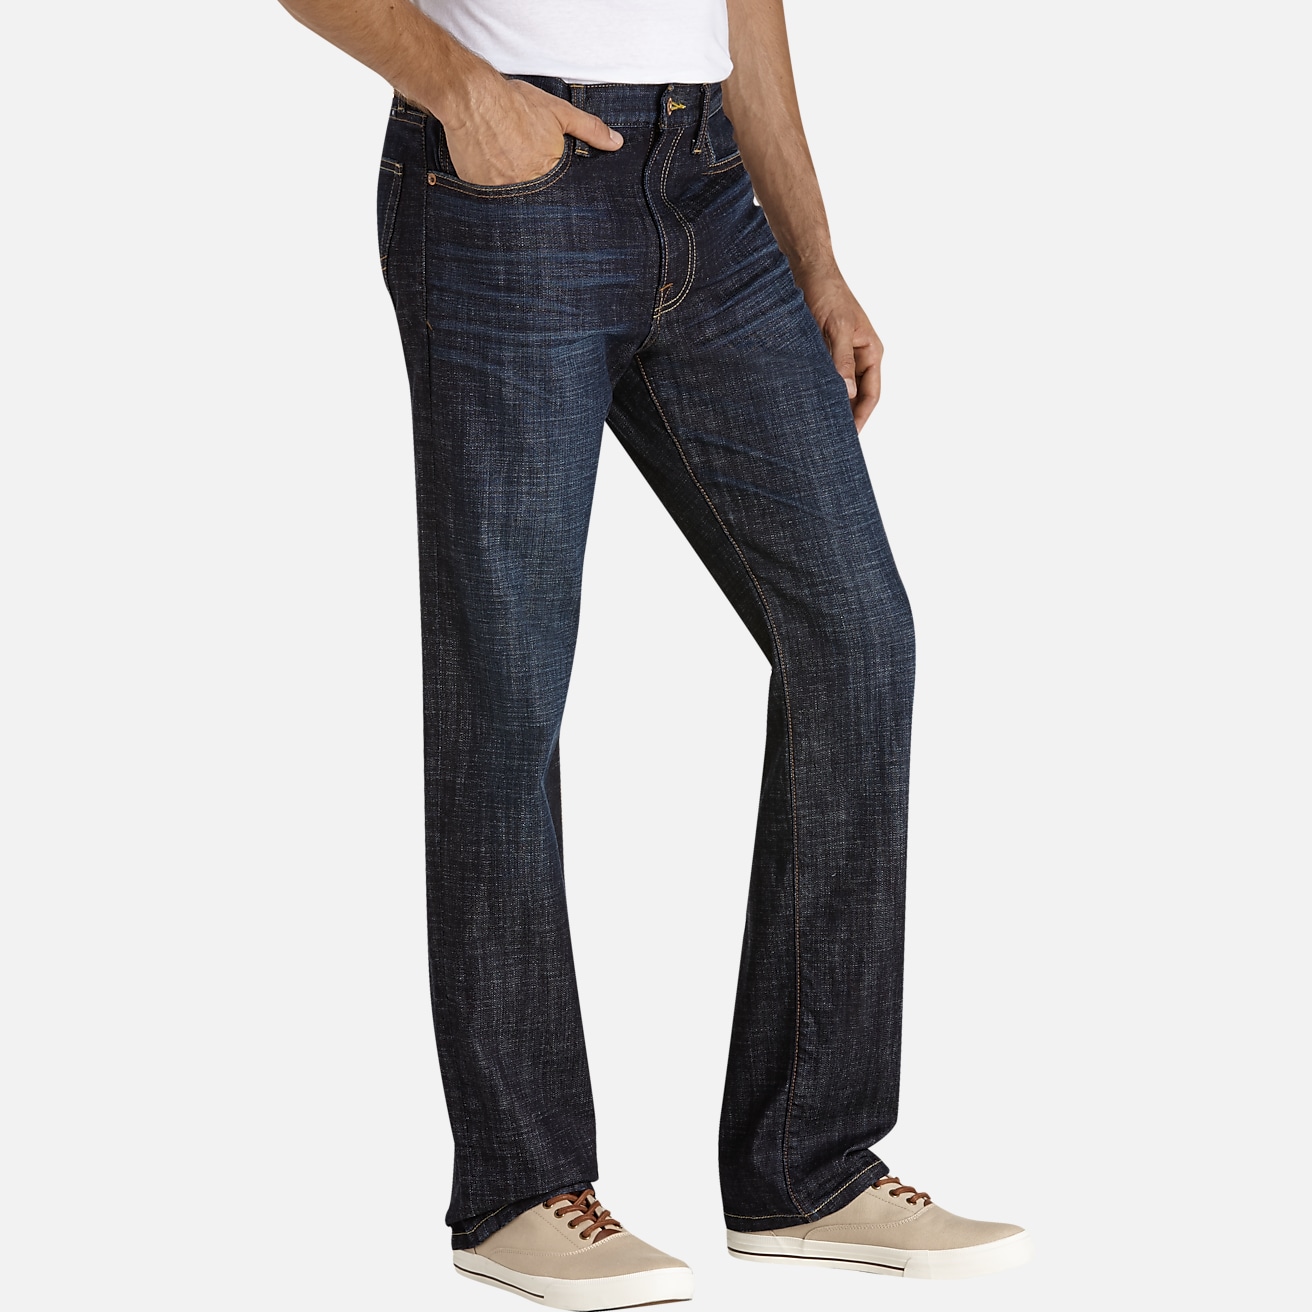 Lucky Brand Light Wash Distressed Jeans